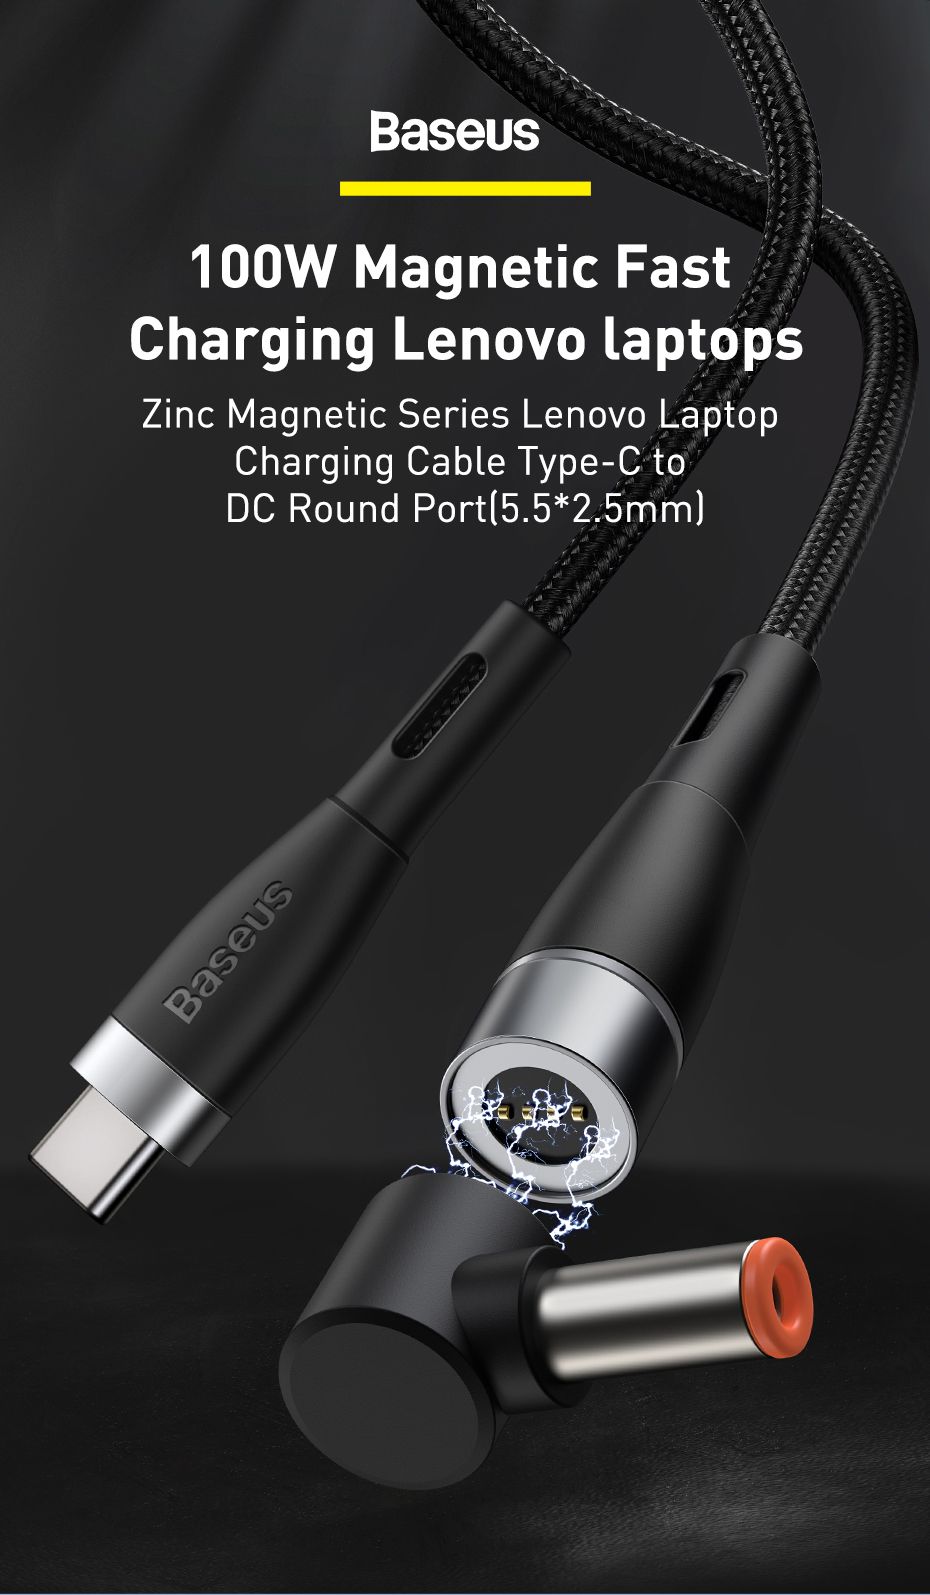 Baseus Zinc Magnetic Series Type C To Dc Round Port5 52 5mm 100w Charging Cable For Laptop (2)